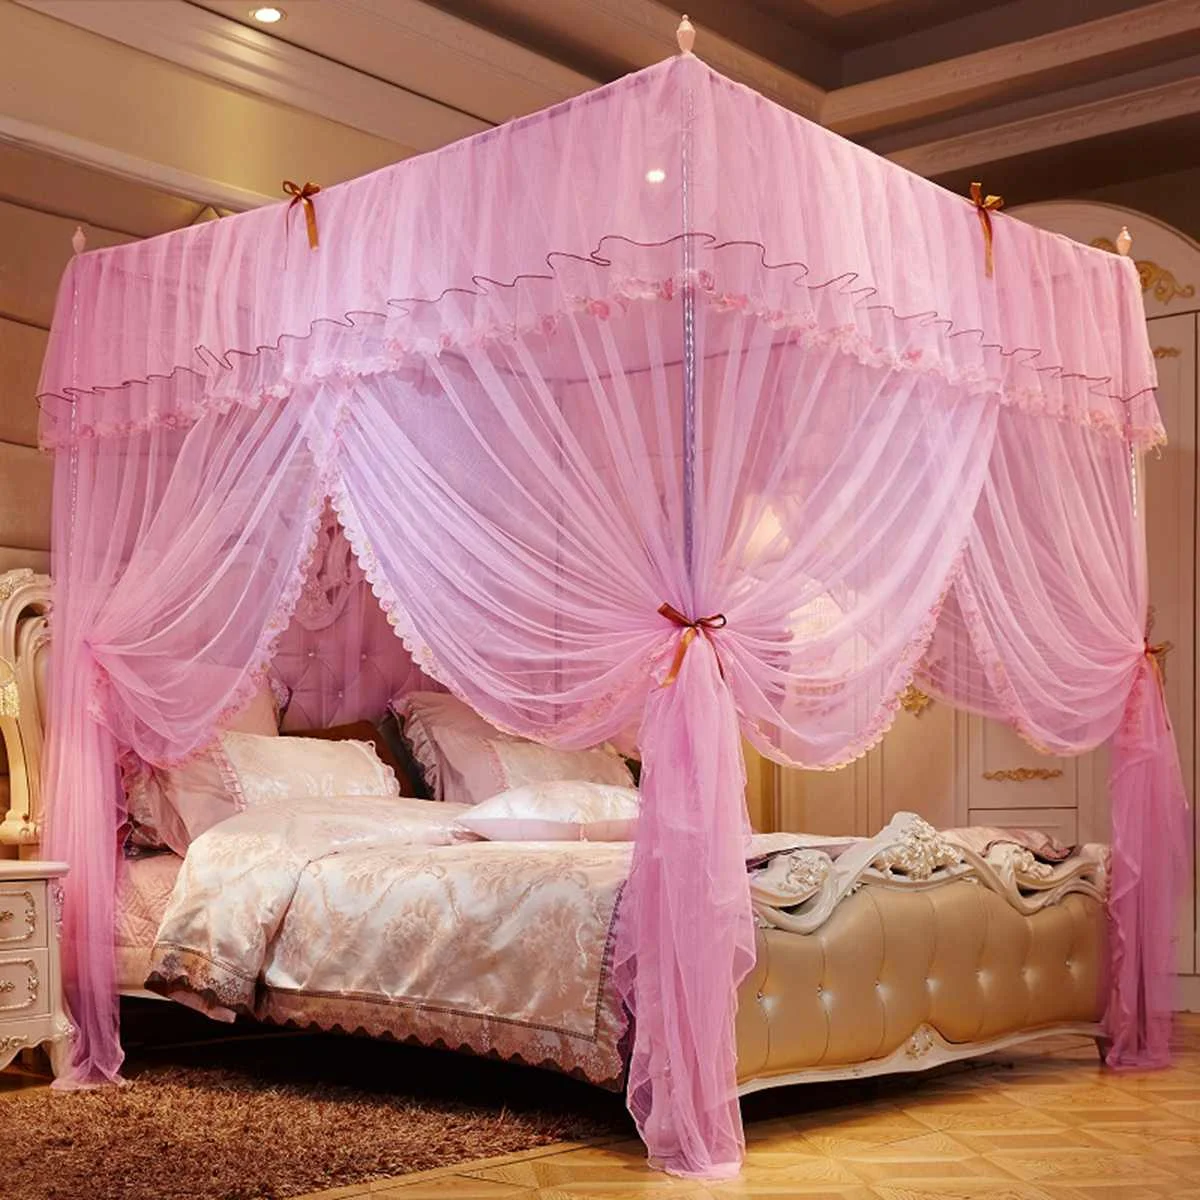 Breathable Round Bed Canopy Lace Princess Style Mosquito Net Bed Curtain Netting for Girls Bedroom Decor Beige A sixx Bed Mosquito Net